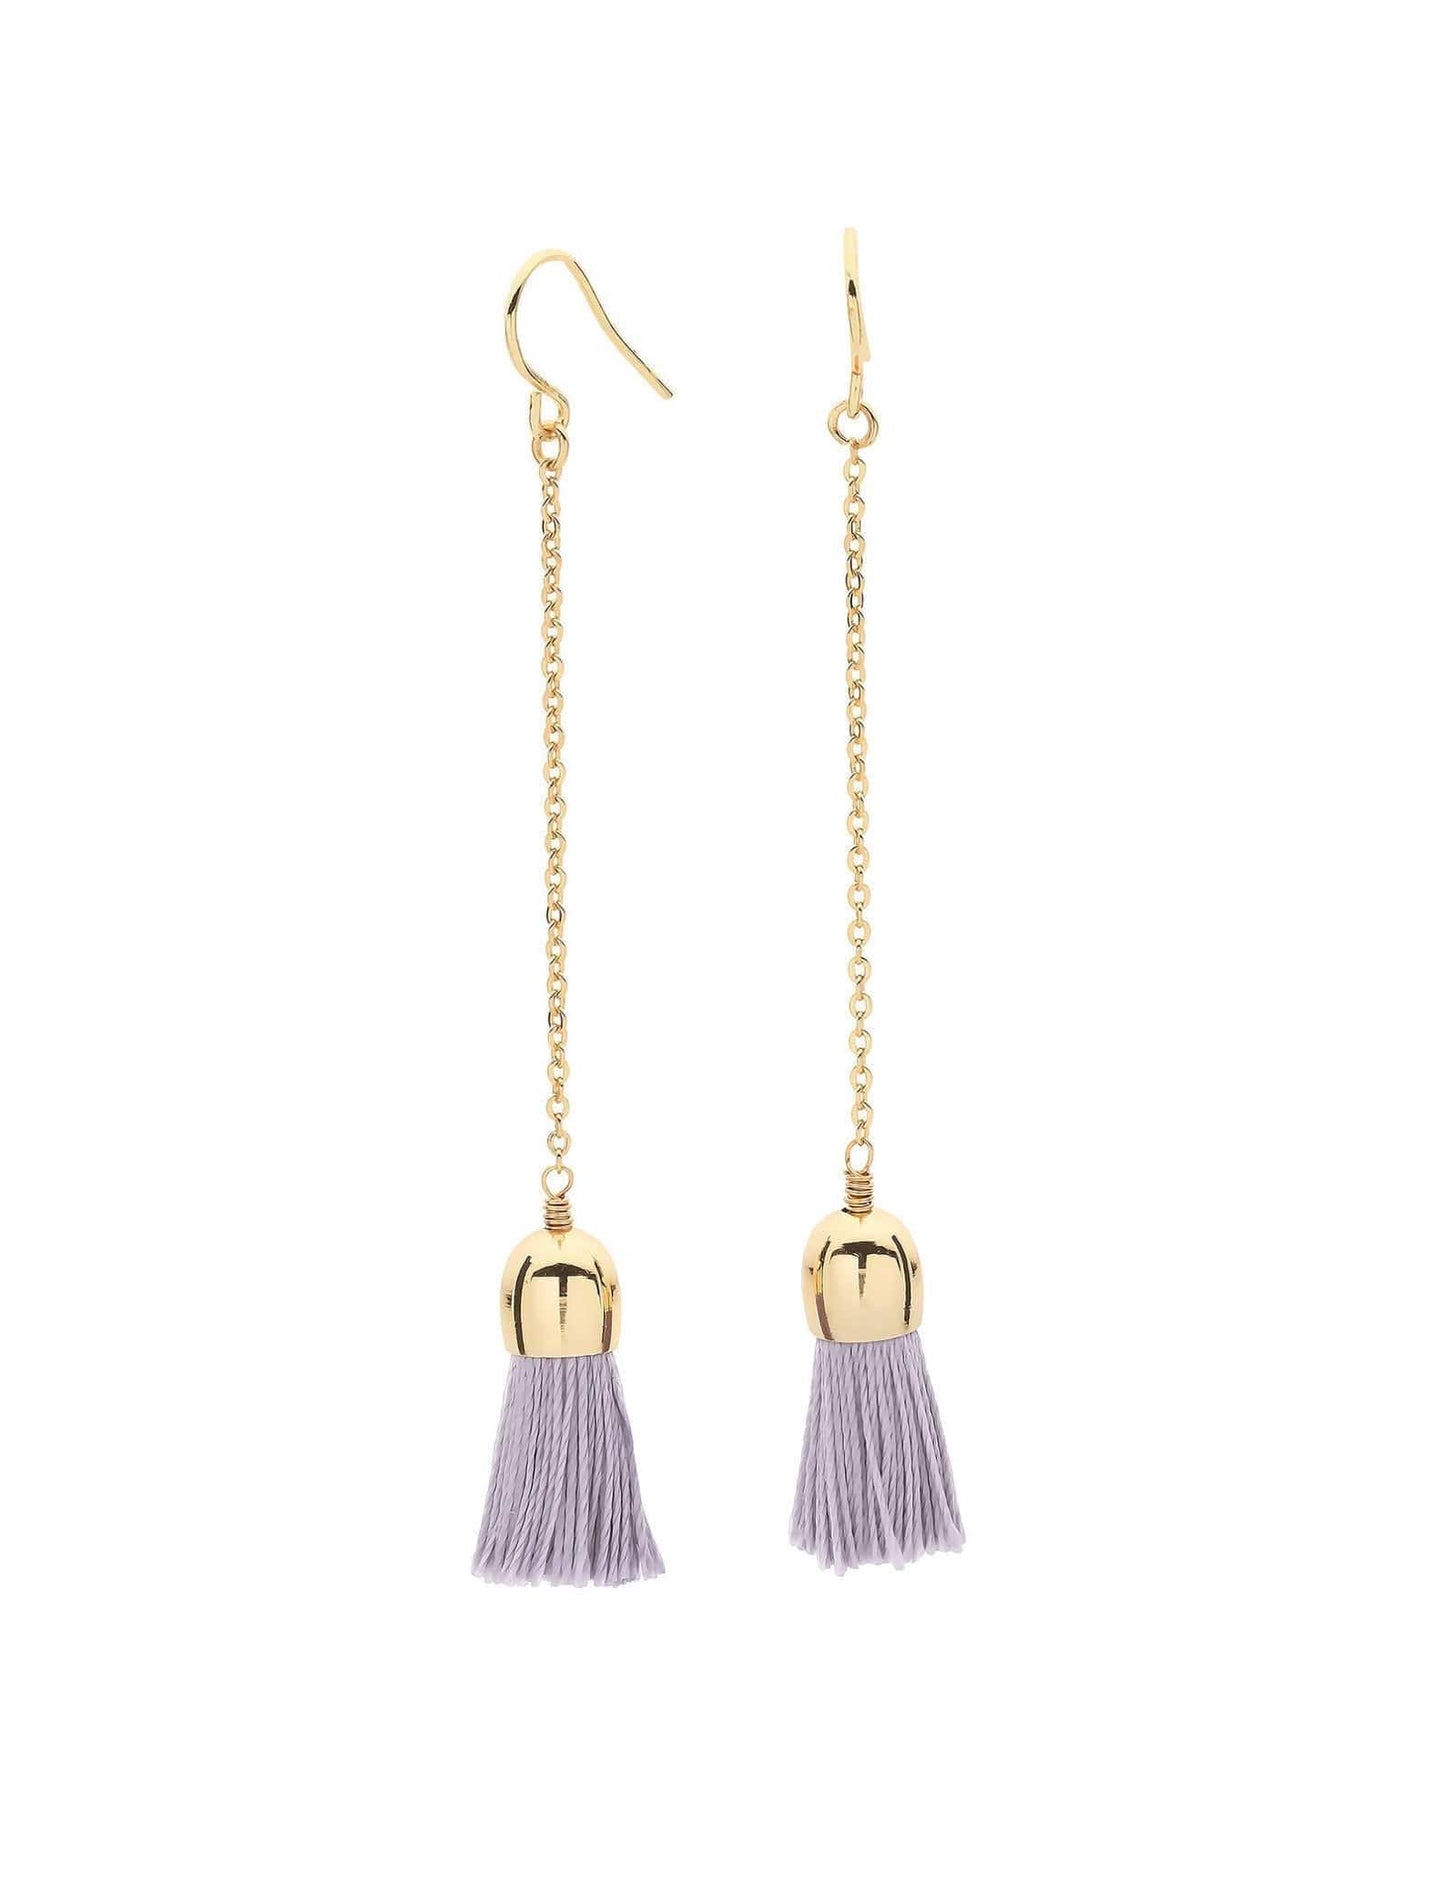 Dear Addison Yellow Gold / Lavender Candytuft Earrings